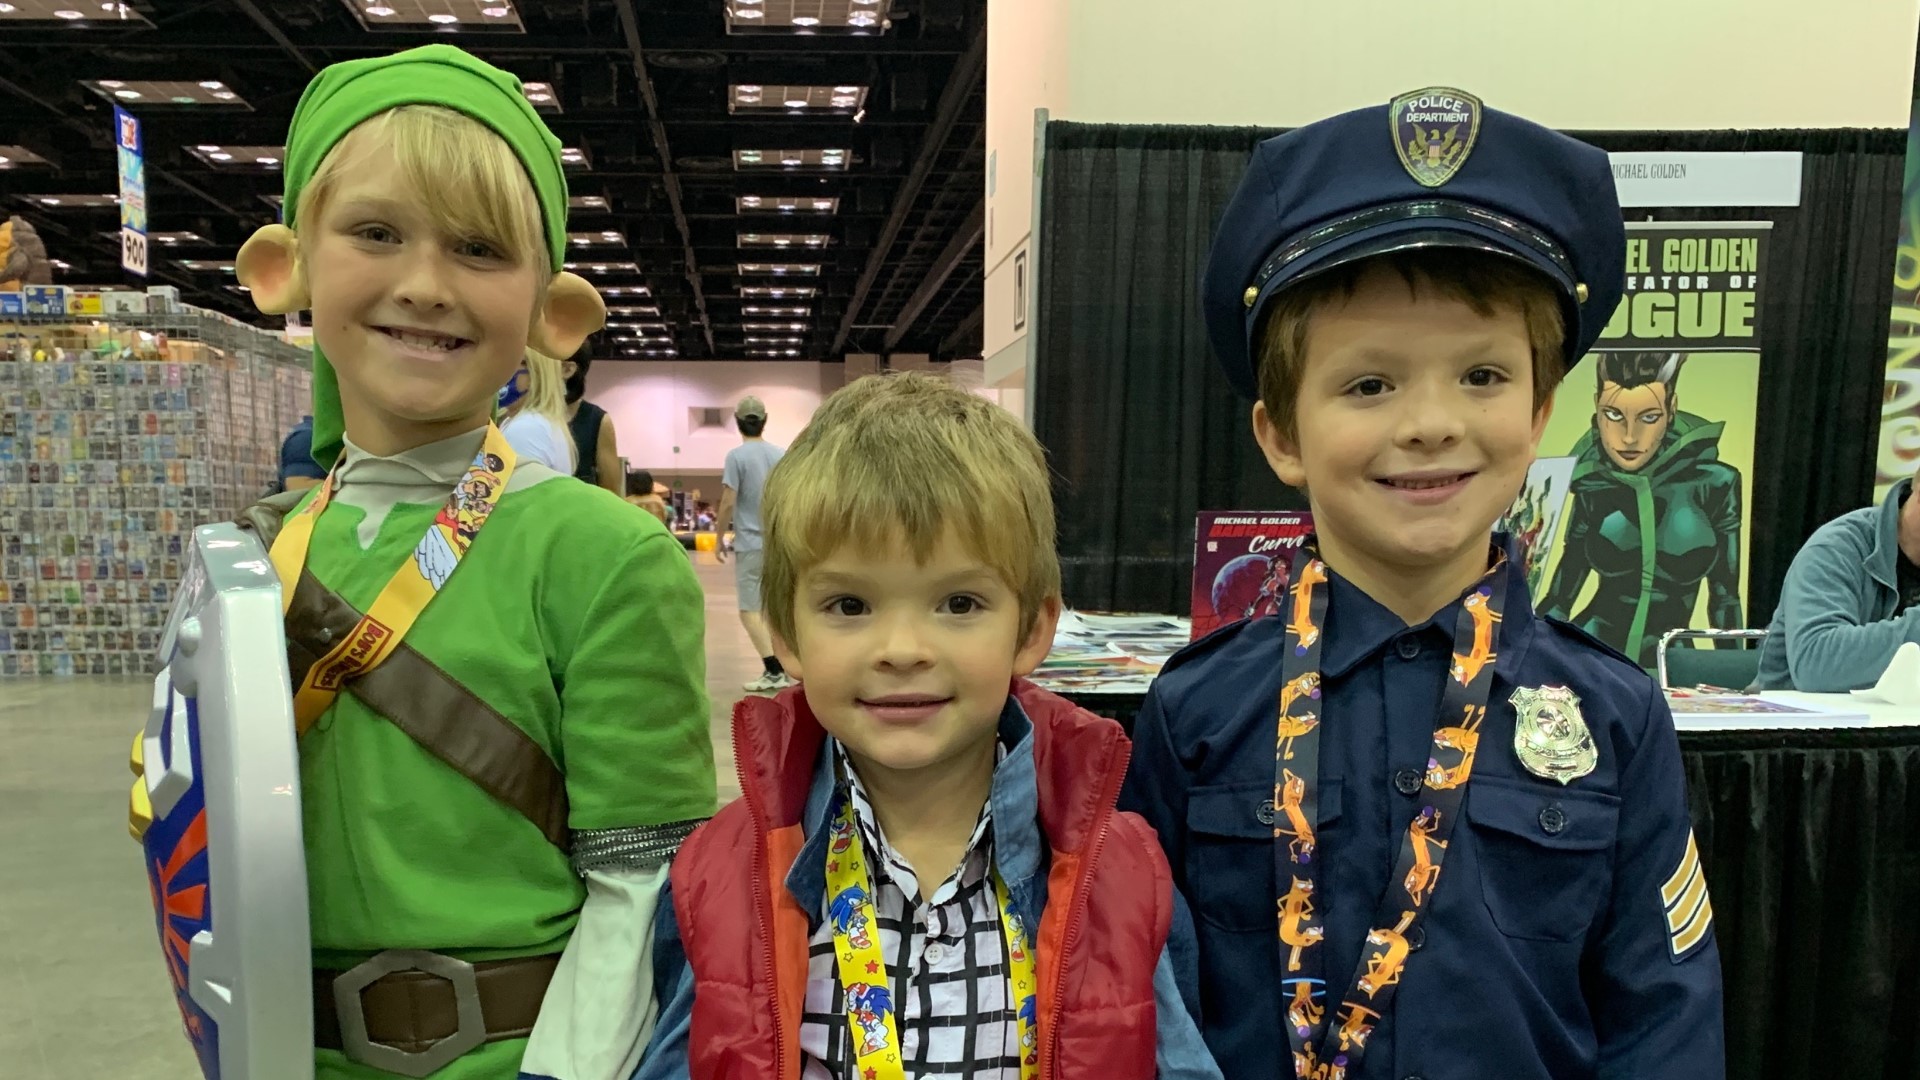 People in Indianapolis over the weekend likely noticed some "characters" downtown. That's because Comic Con is back in full swing at the Indiana Convention Center.